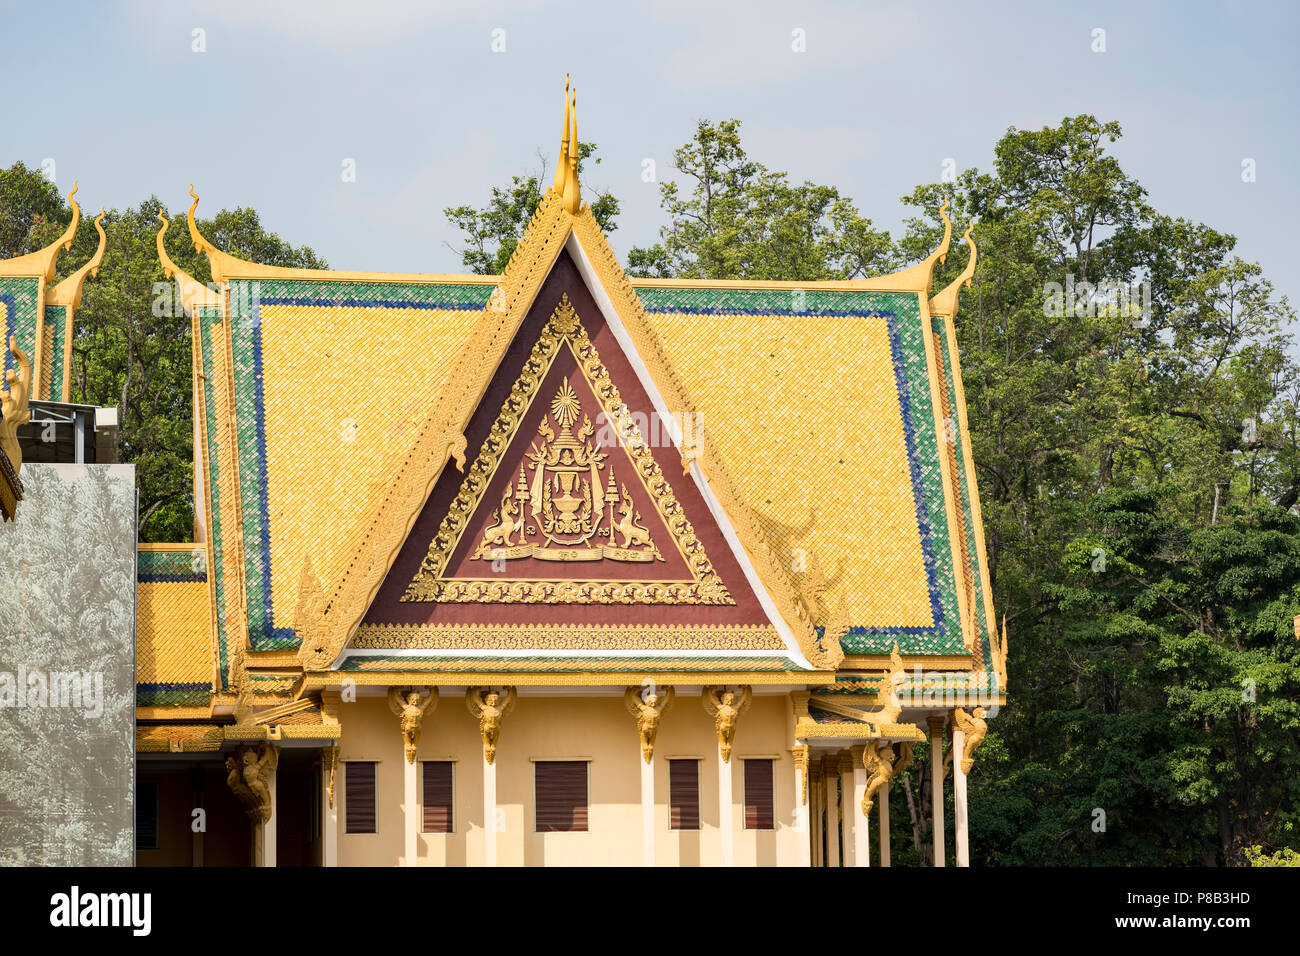 Detail design of cambodian art on the roof of a bulding at the Royal Palace of Phnom Penh, Cambodia Stock Photo